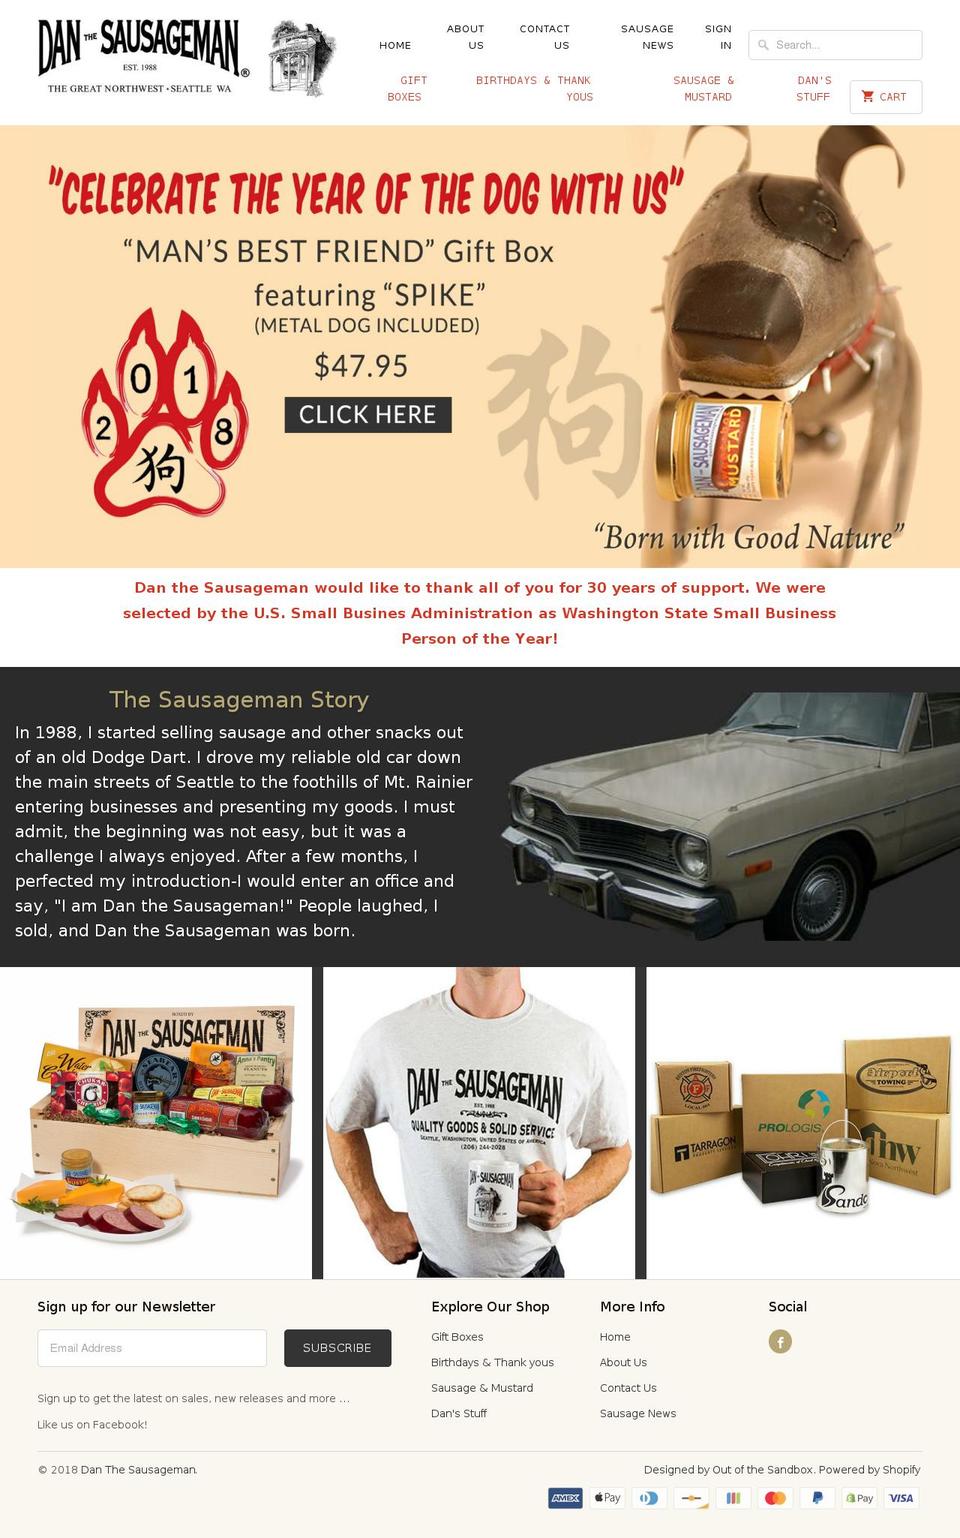 Gifts Shopify theme site example danthesausageman.com